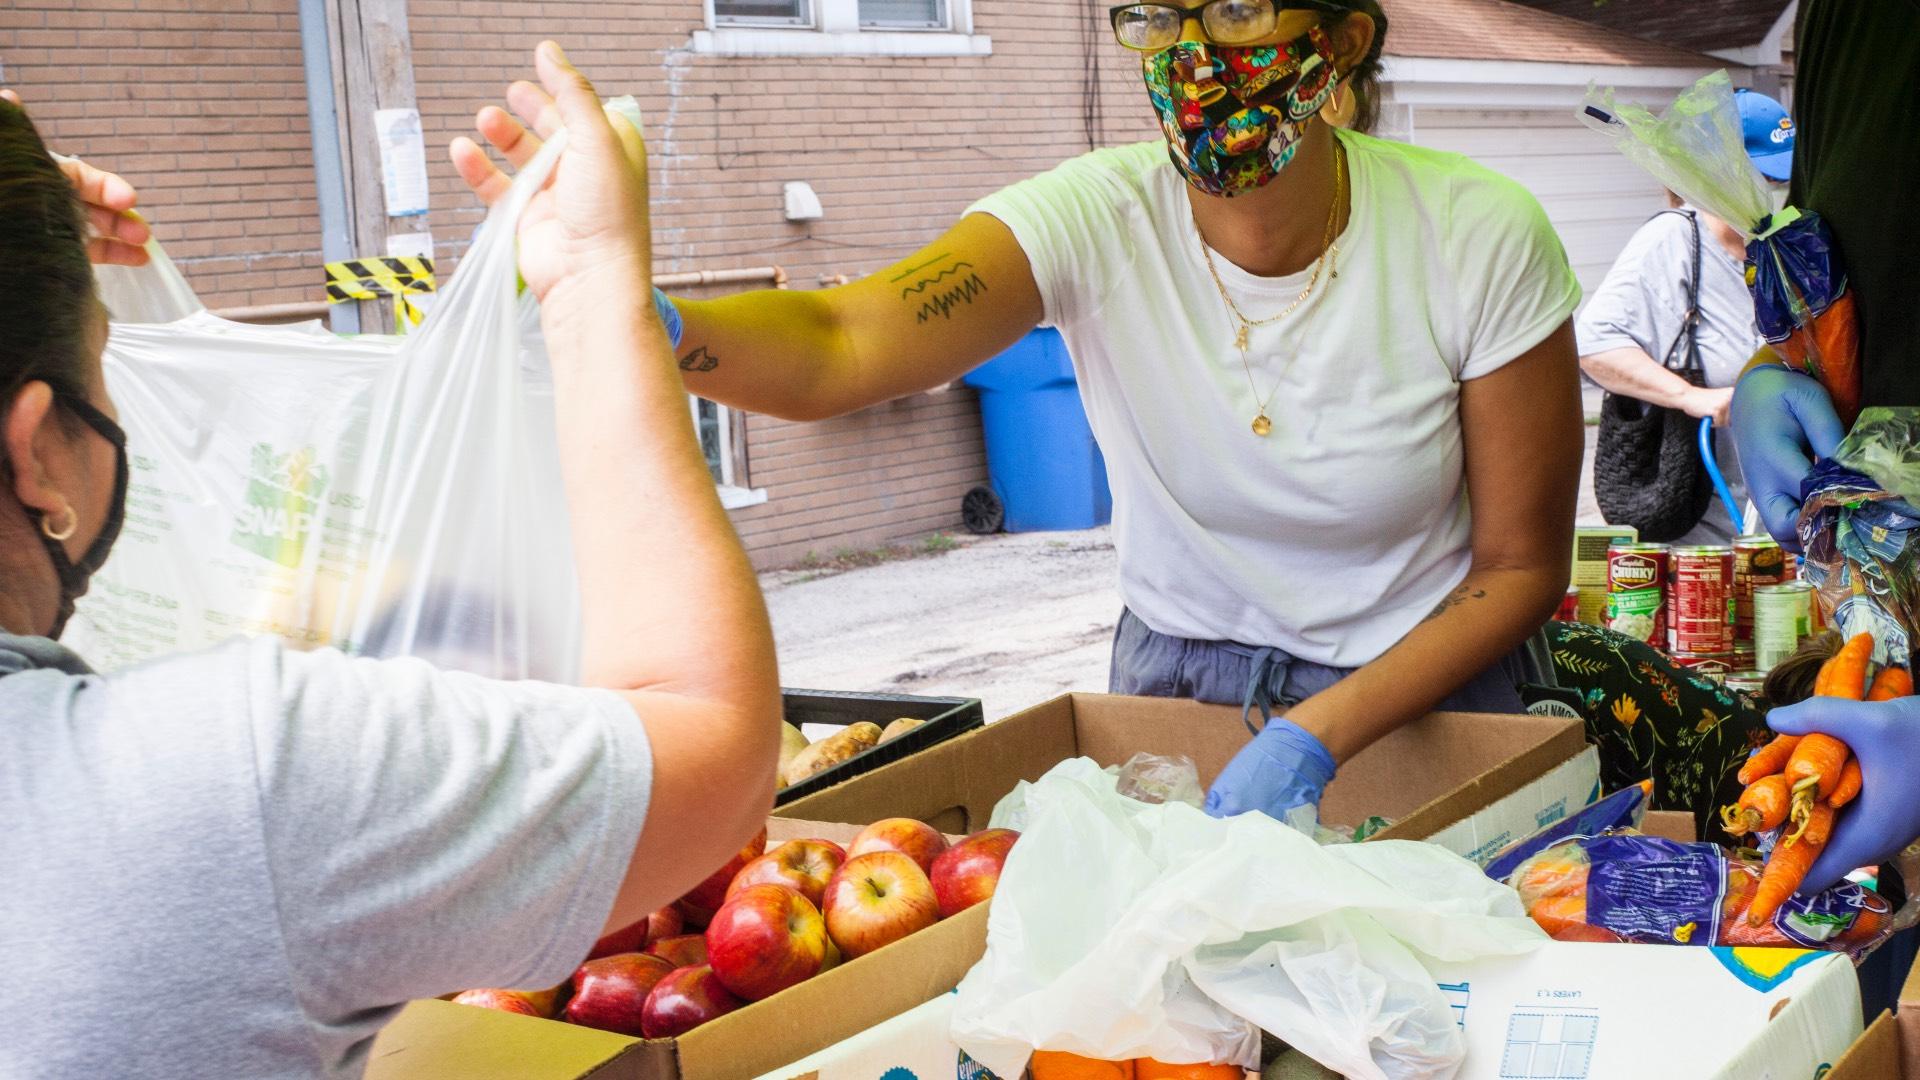 Volunteering looks different during the pandemic, but organizations still need help. (Courtesy of Northwest Side Solidarity Network)